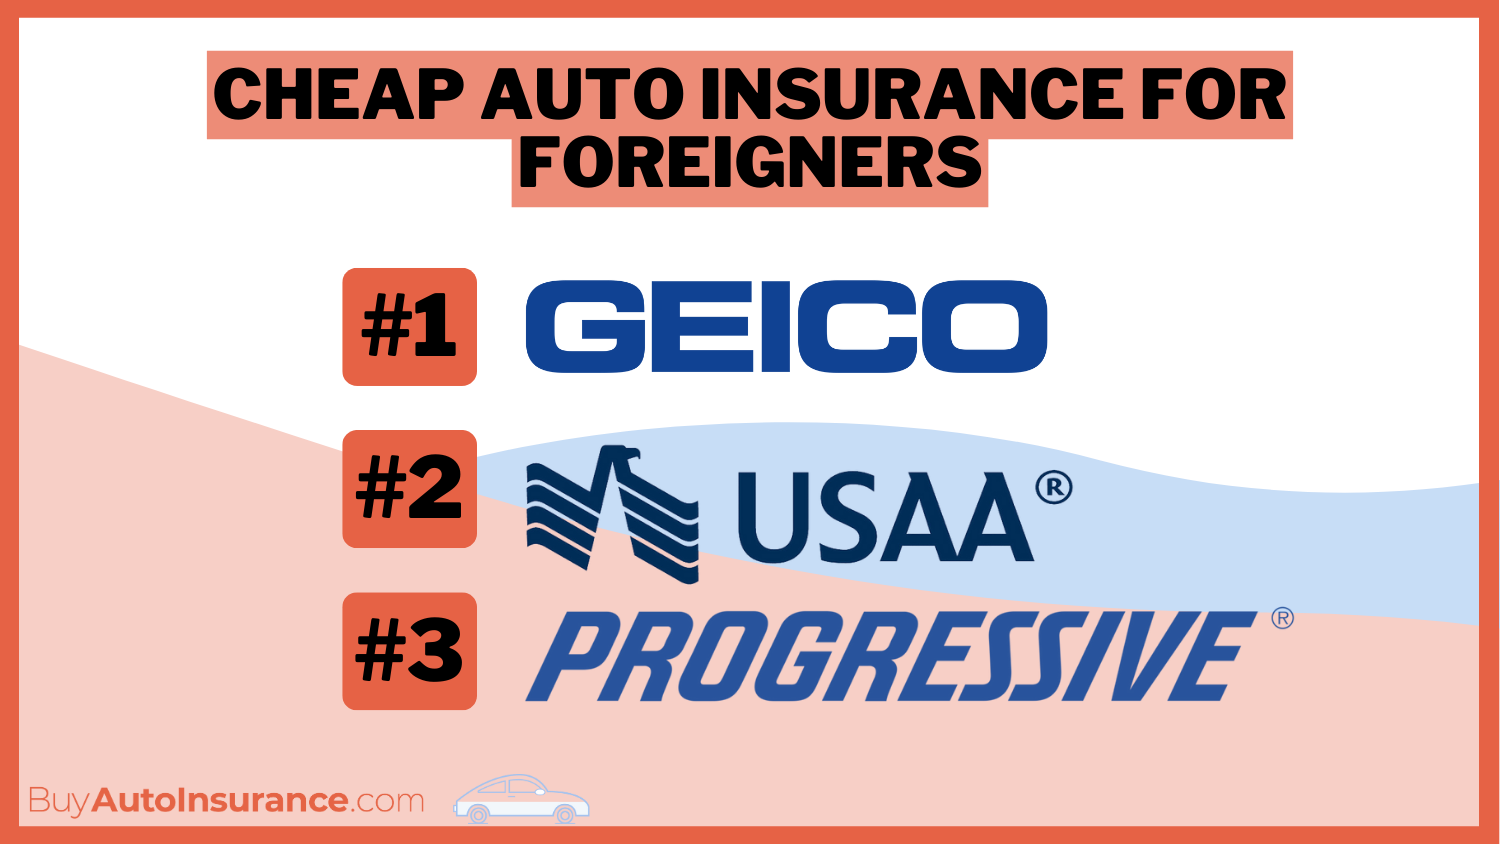 Geico, USAA, Progressive: Cheap Auto Insurance for Foreigners